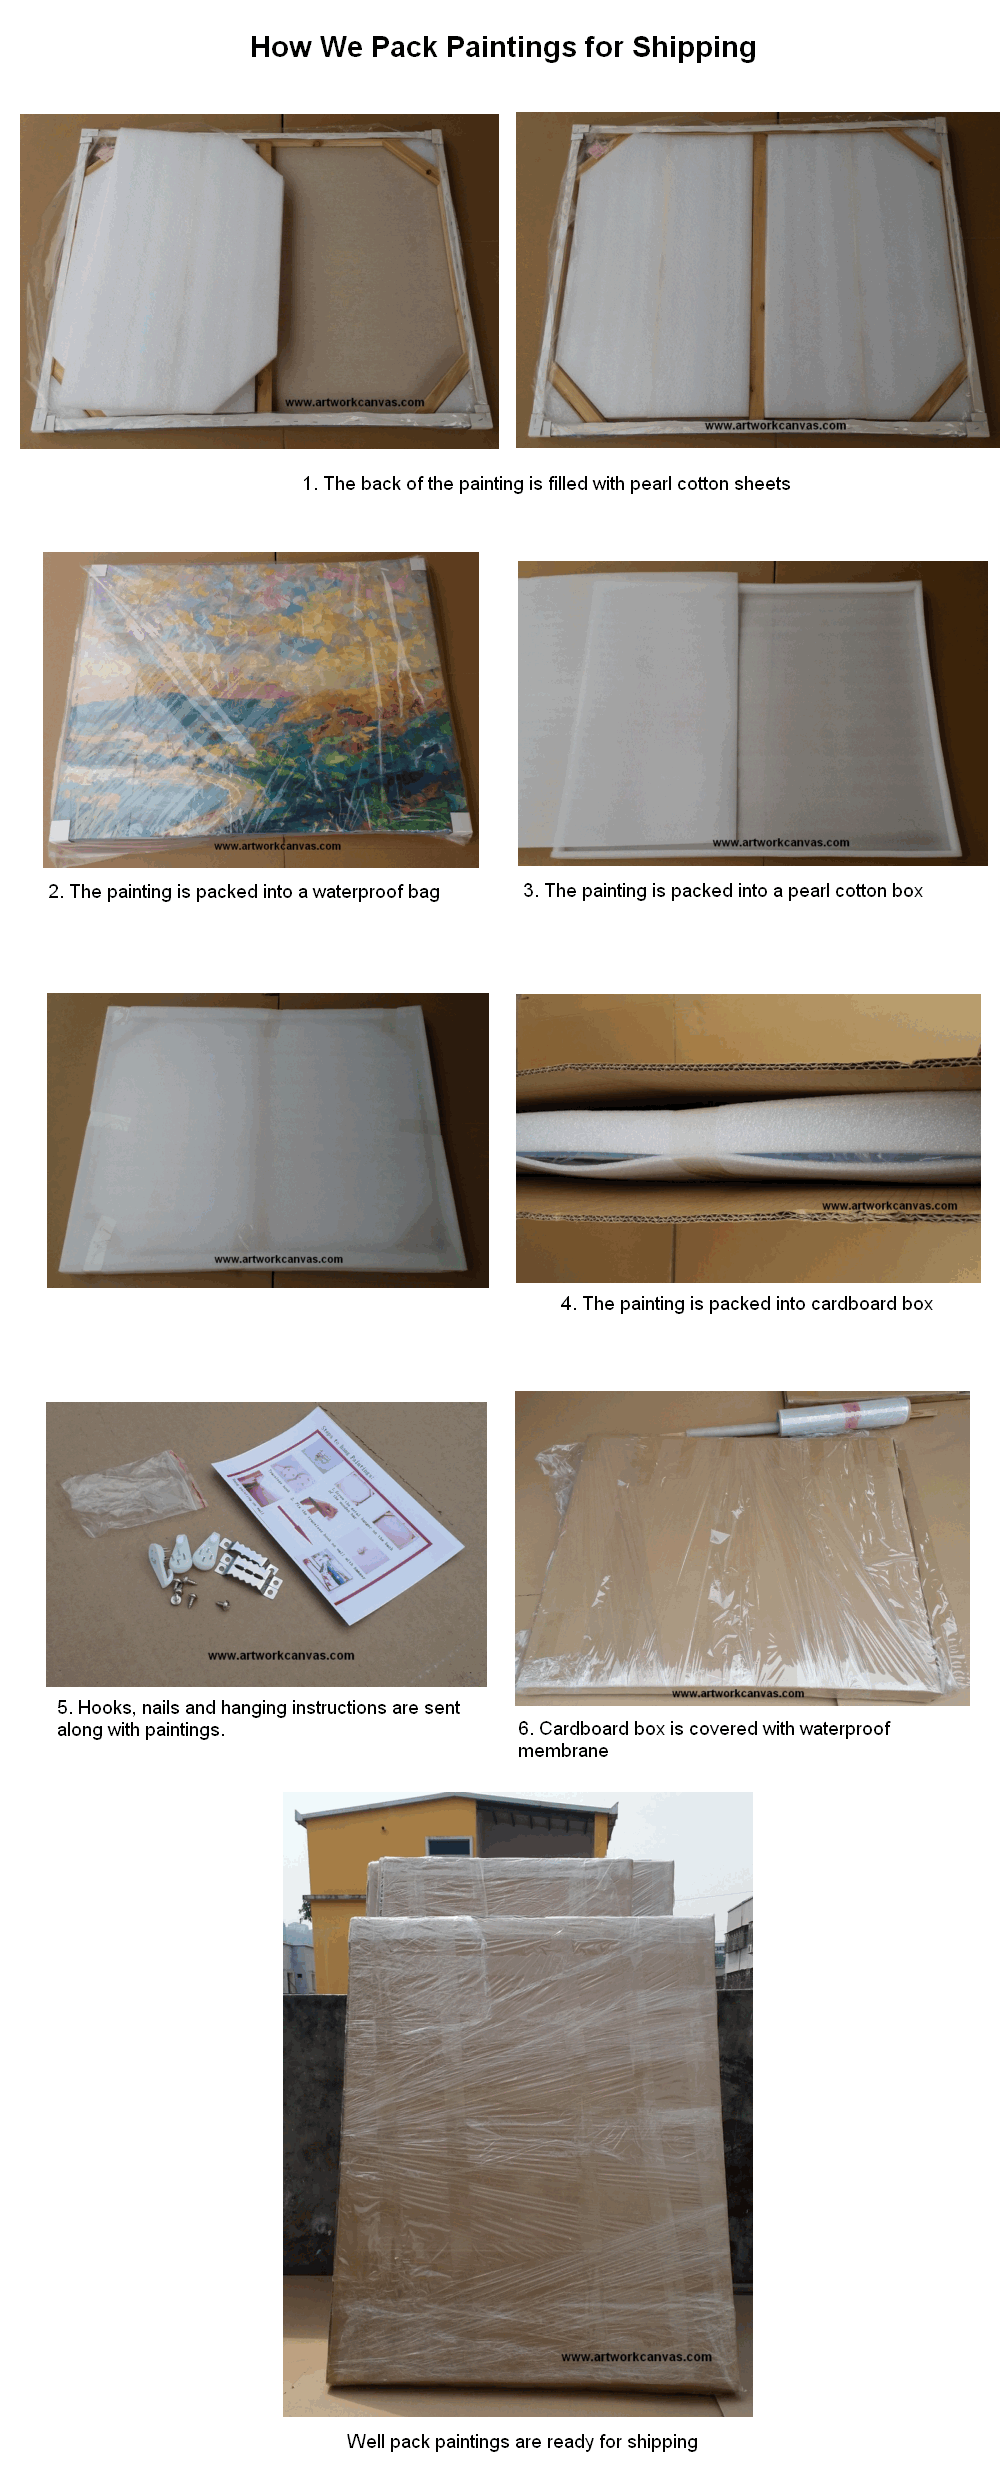 how we pack paintings for shipping